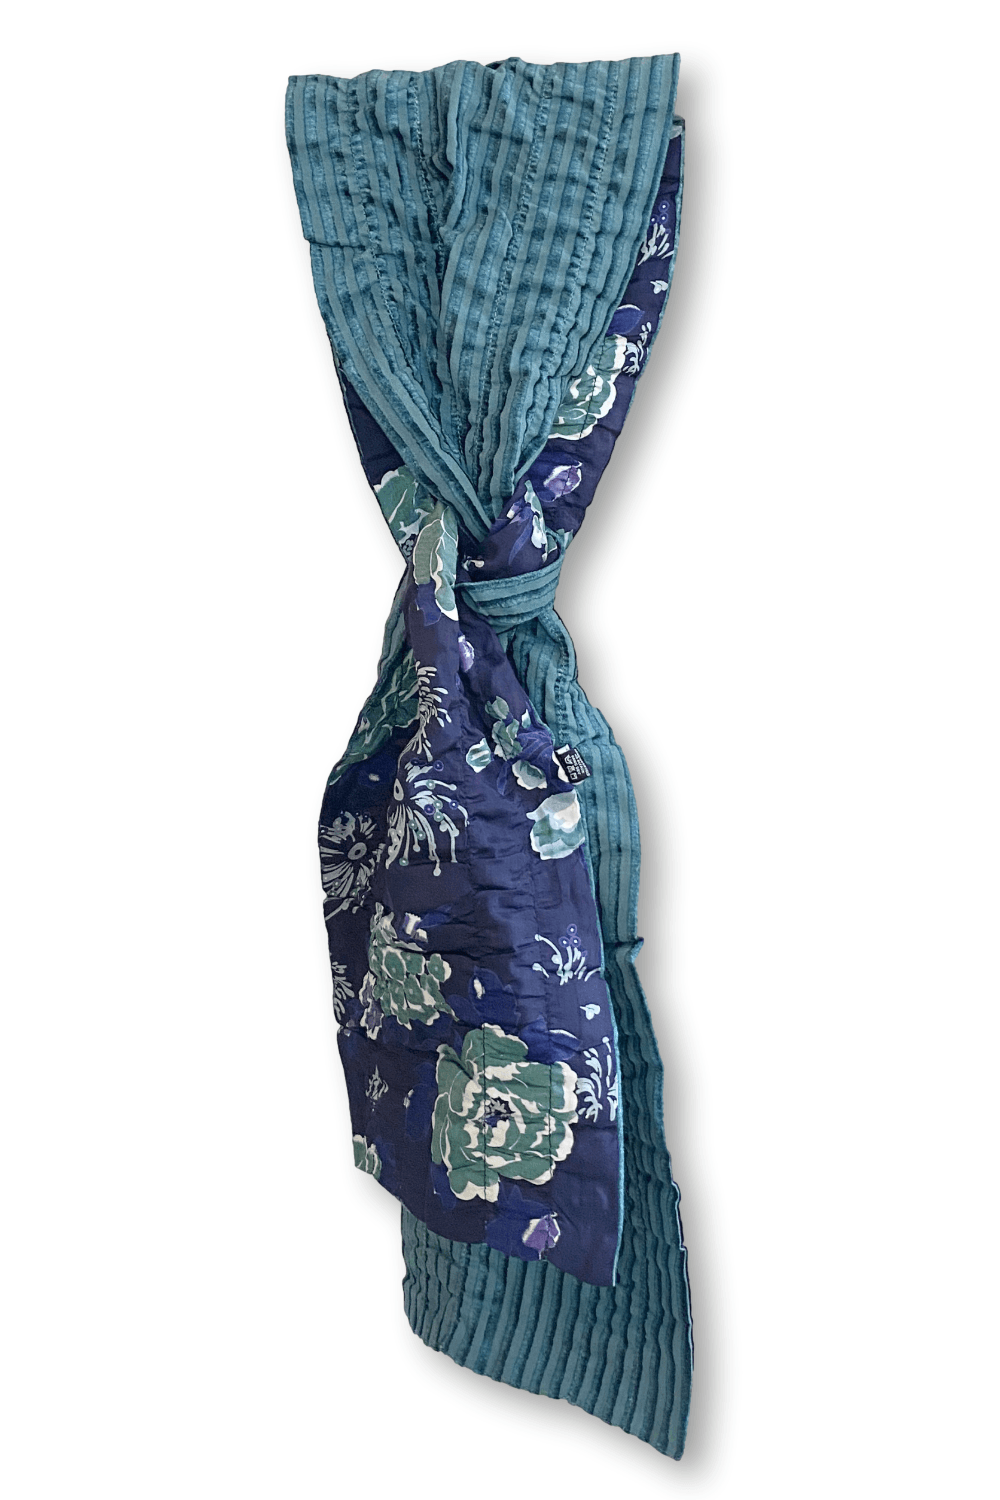 Velvet reversible scarf with stripes and a floral design in teal tones.